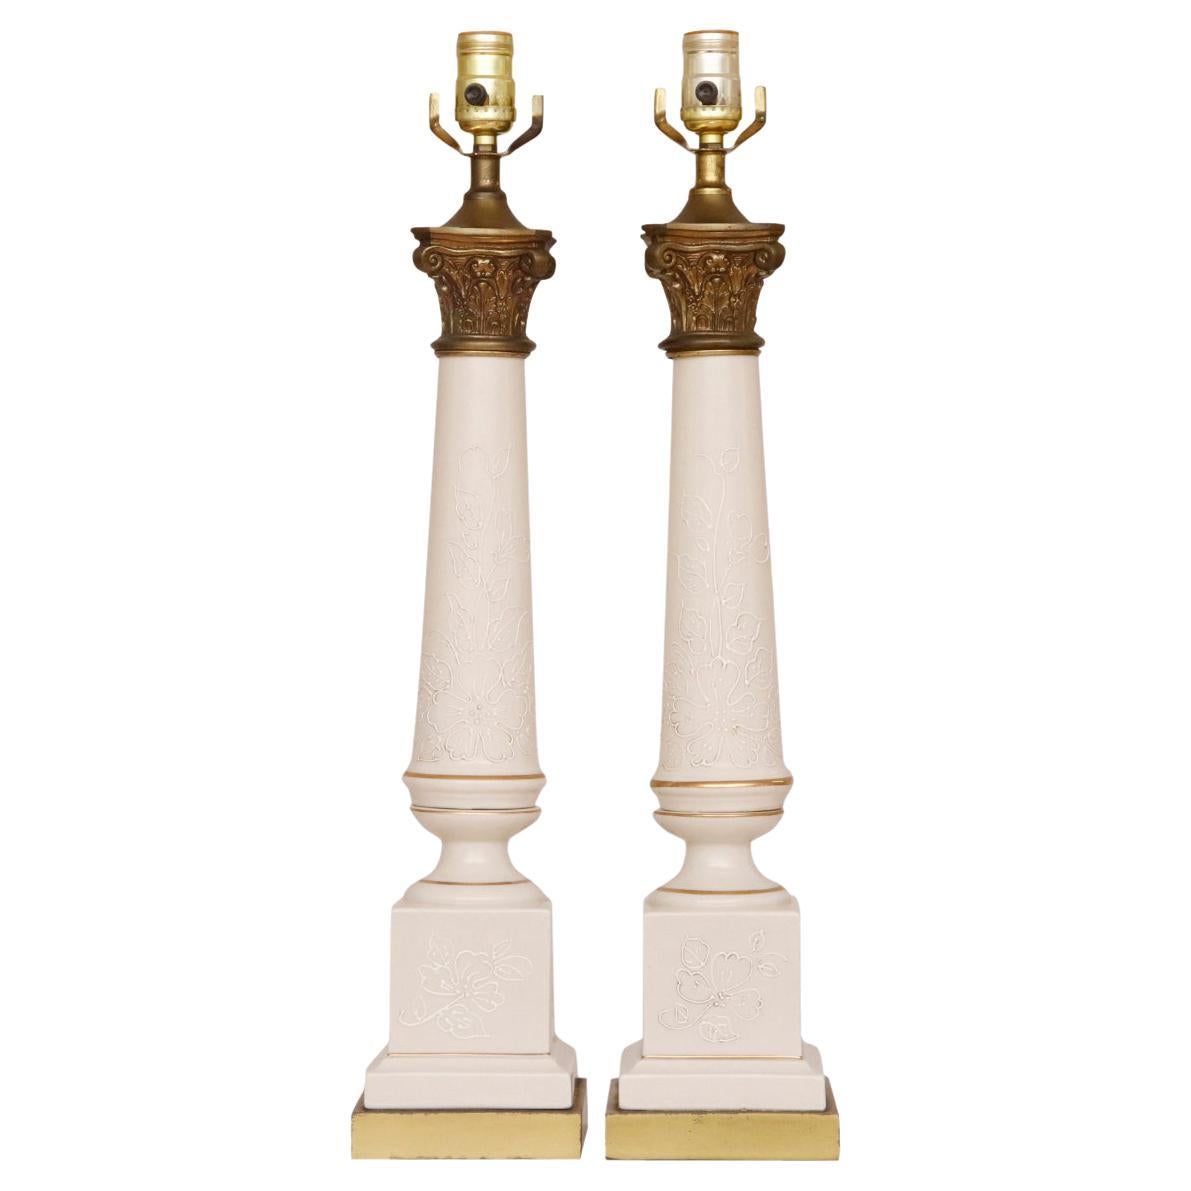 French Empire Ceramic Table Lamps by Tyndale, a Pair For Sale